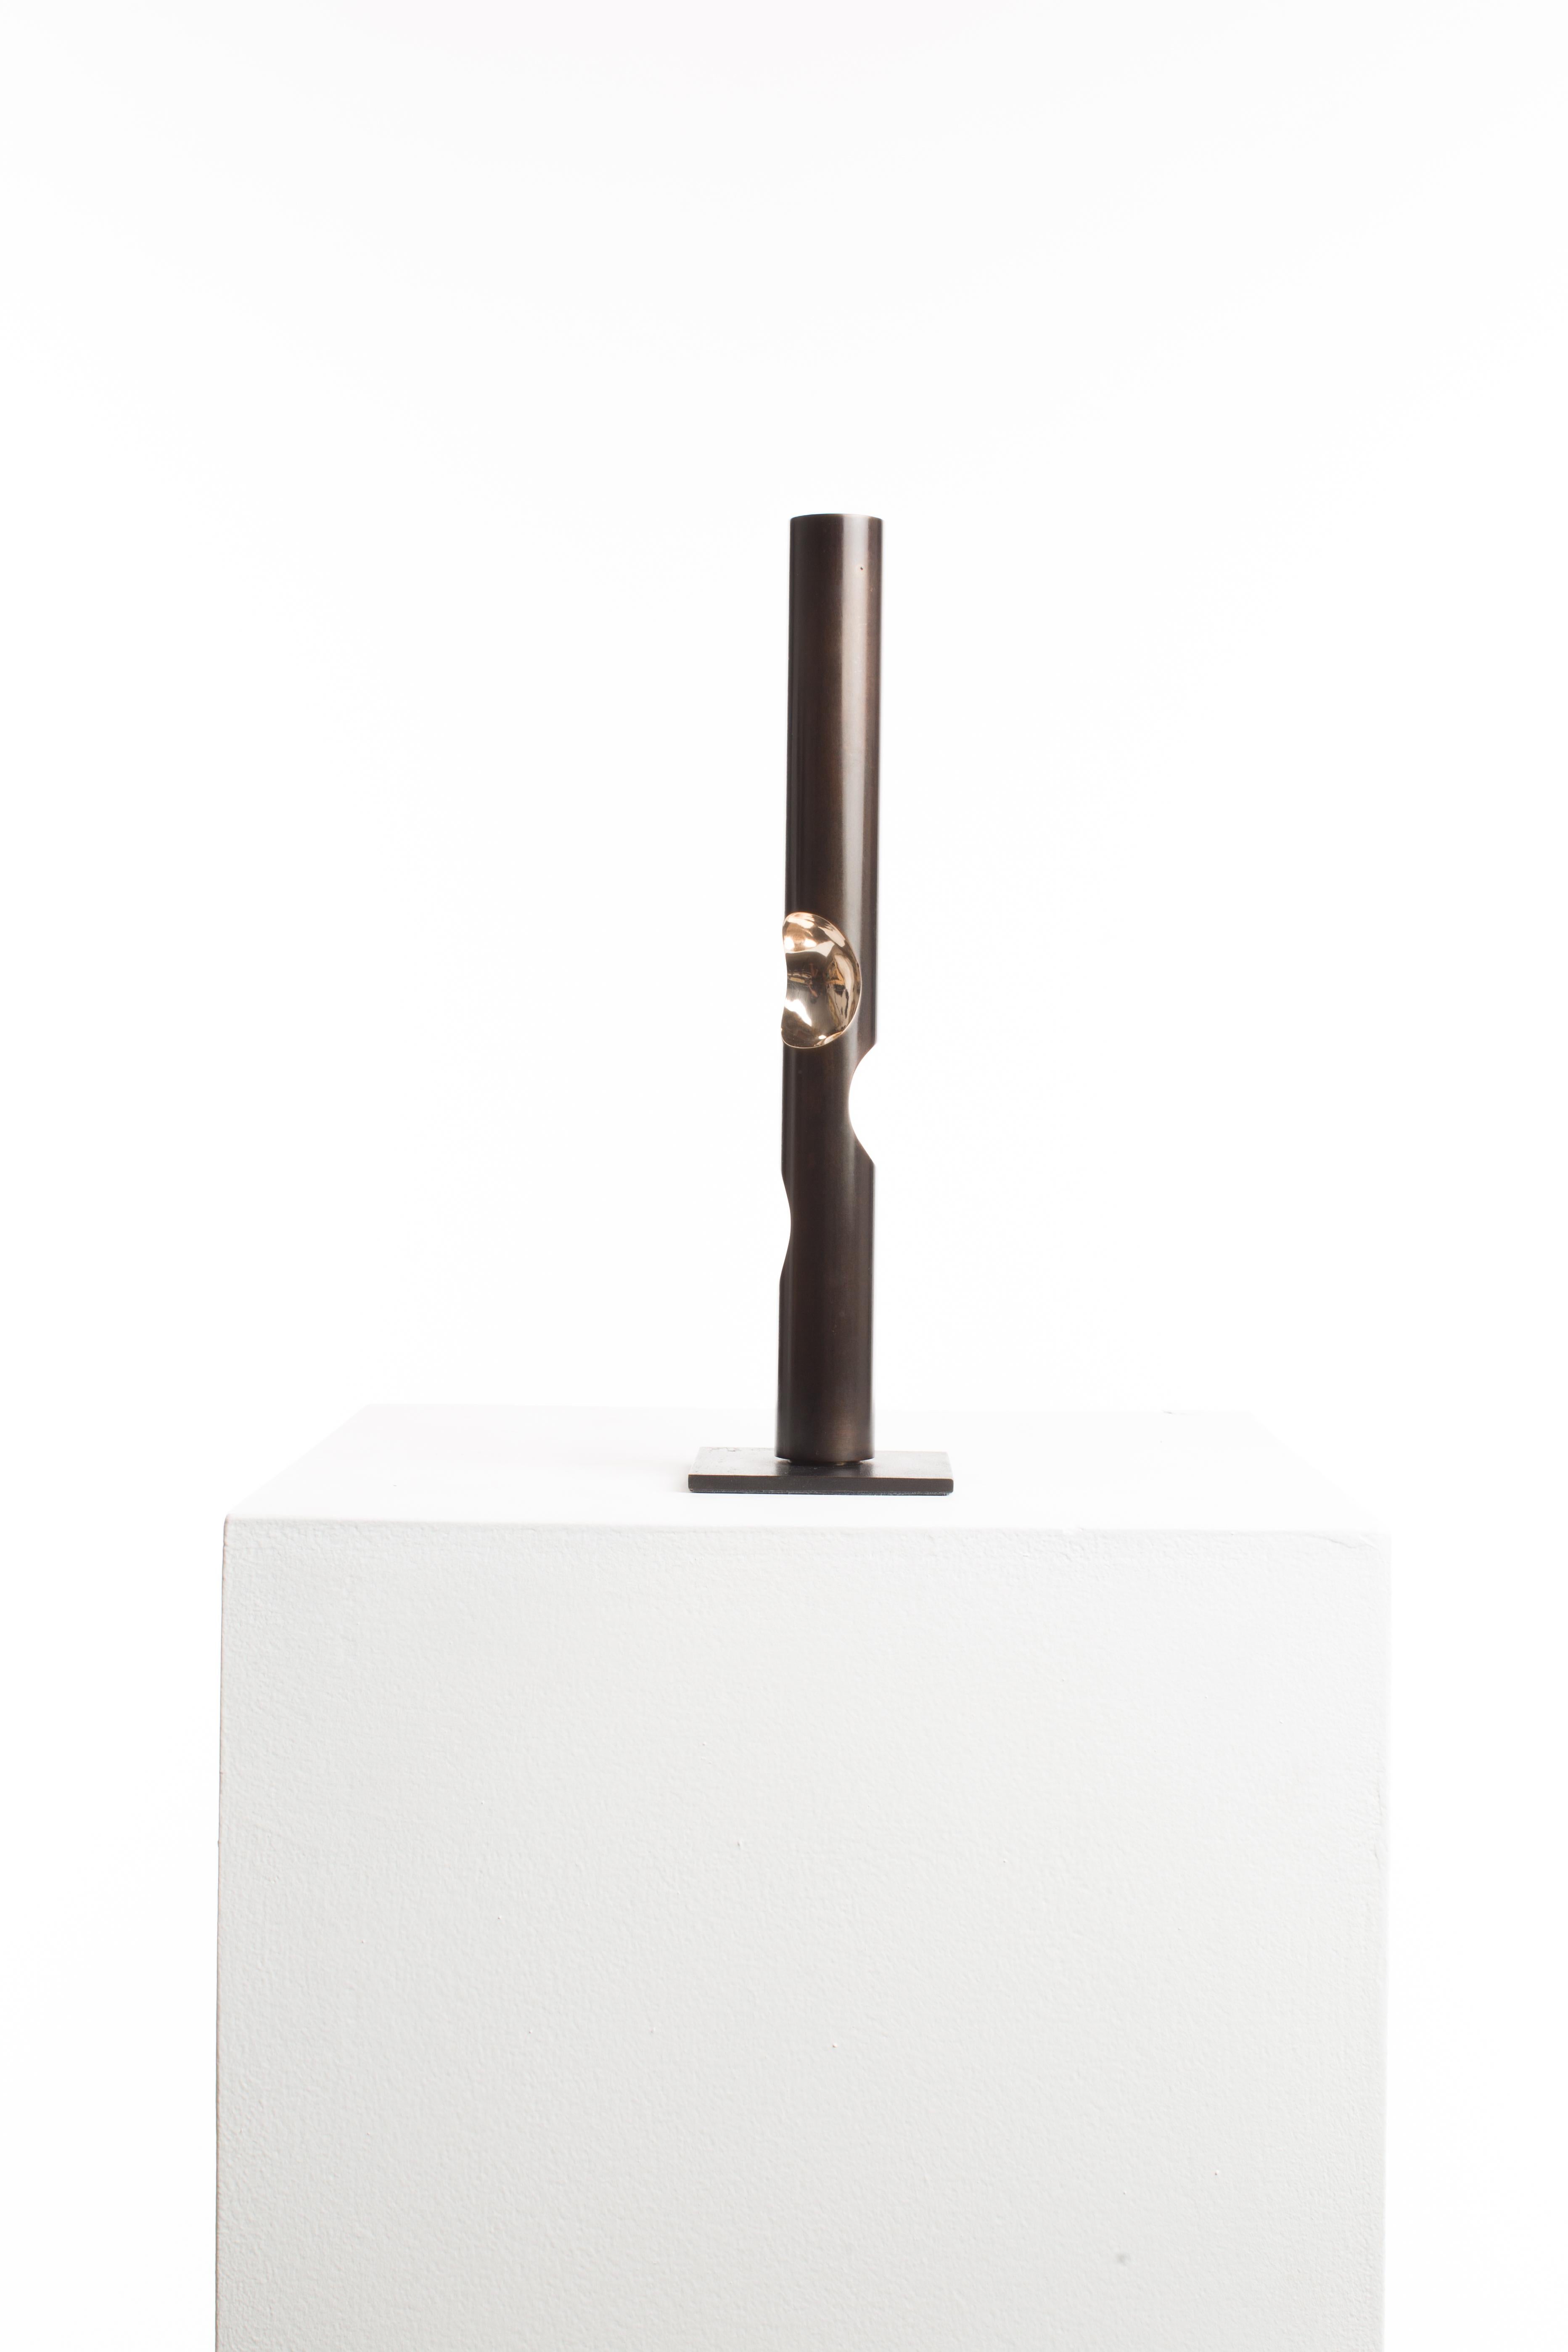 Candle Holder 002 
1/10
Bronze
10cm x 10cm x 37cm 
3.30Kg
2019

Crystalized Sculptures is an abstracted exploration of marks left on the physical mind by experiences of emotion and feelings. In Driaan Claassens' work, where whisps portray the